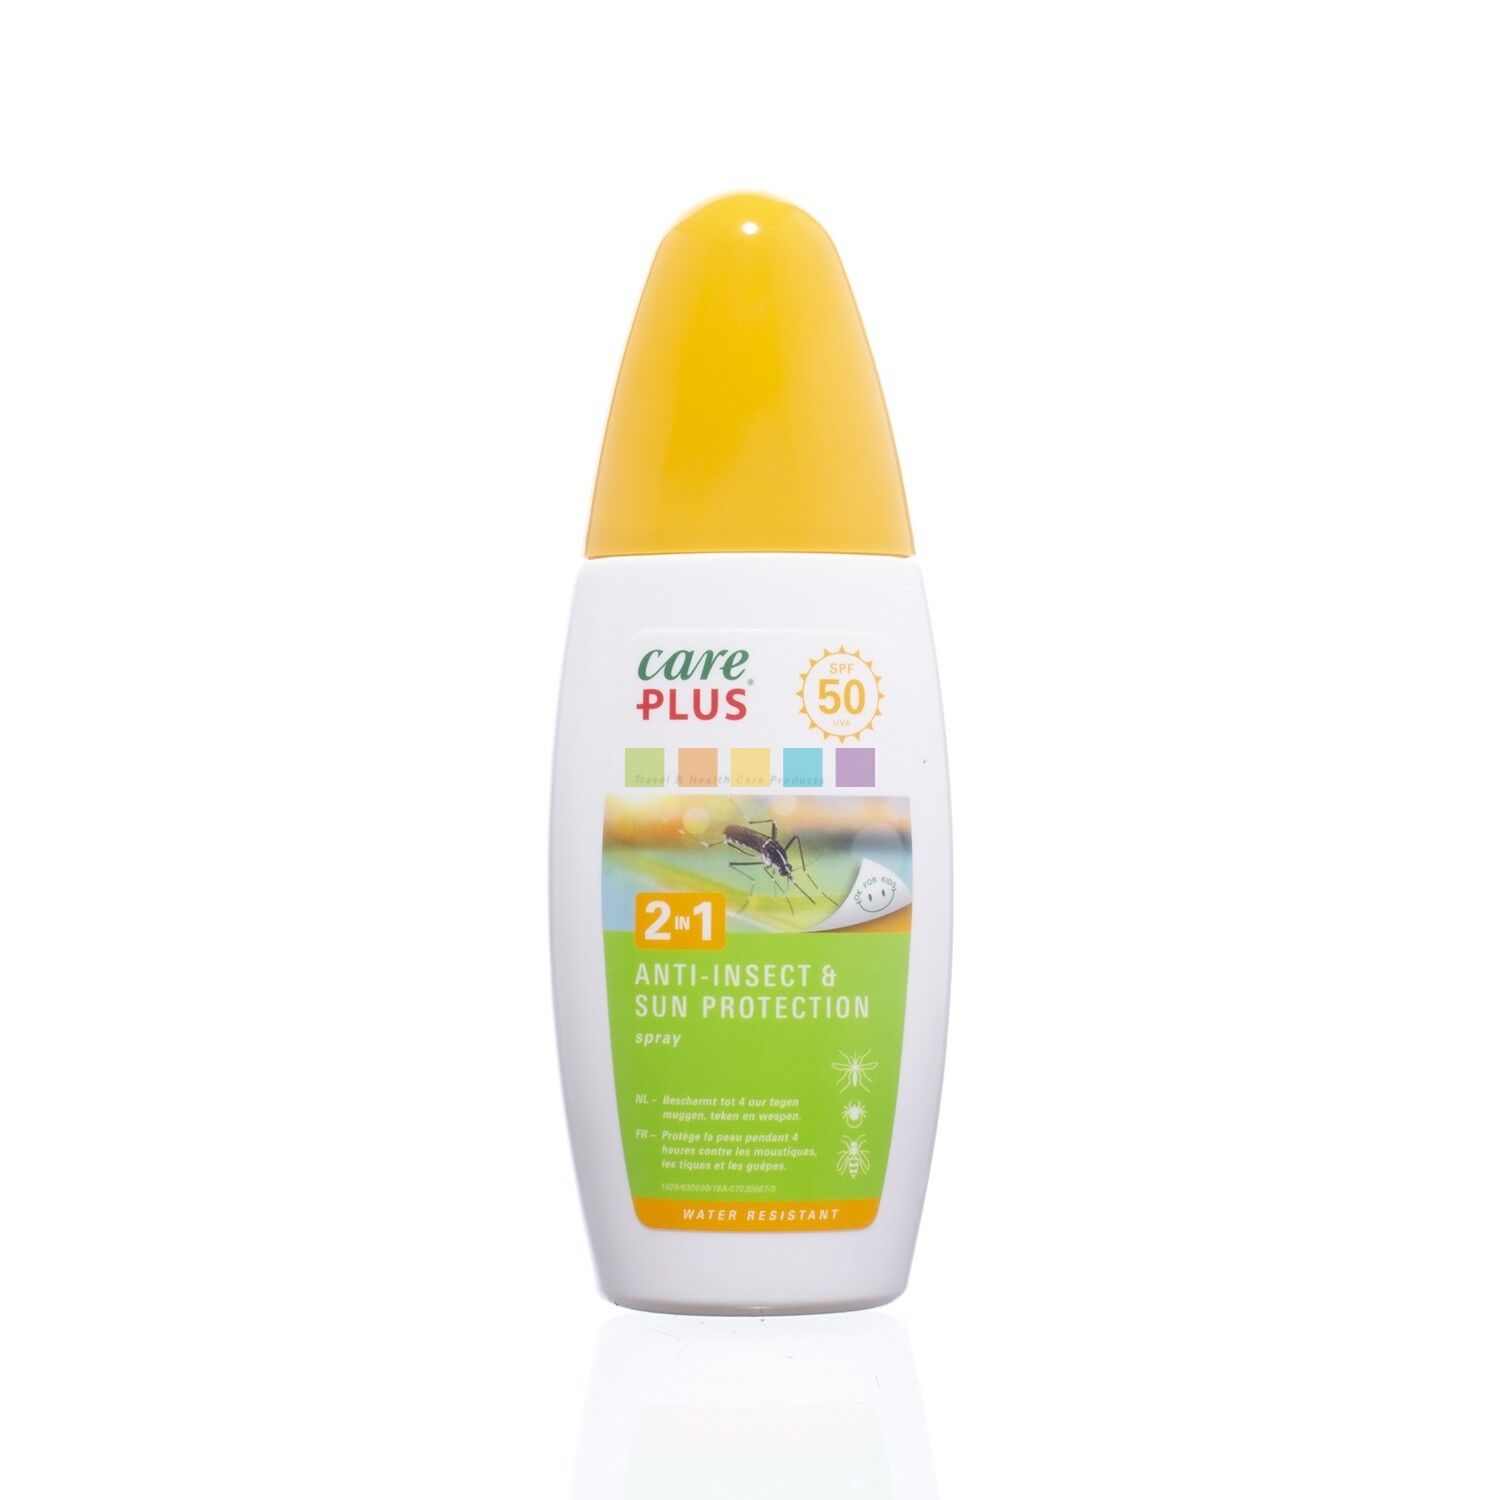 Care Plus 2in1 Anti-Insect & Sun Protection Spray SPF50 - Insektenschutz